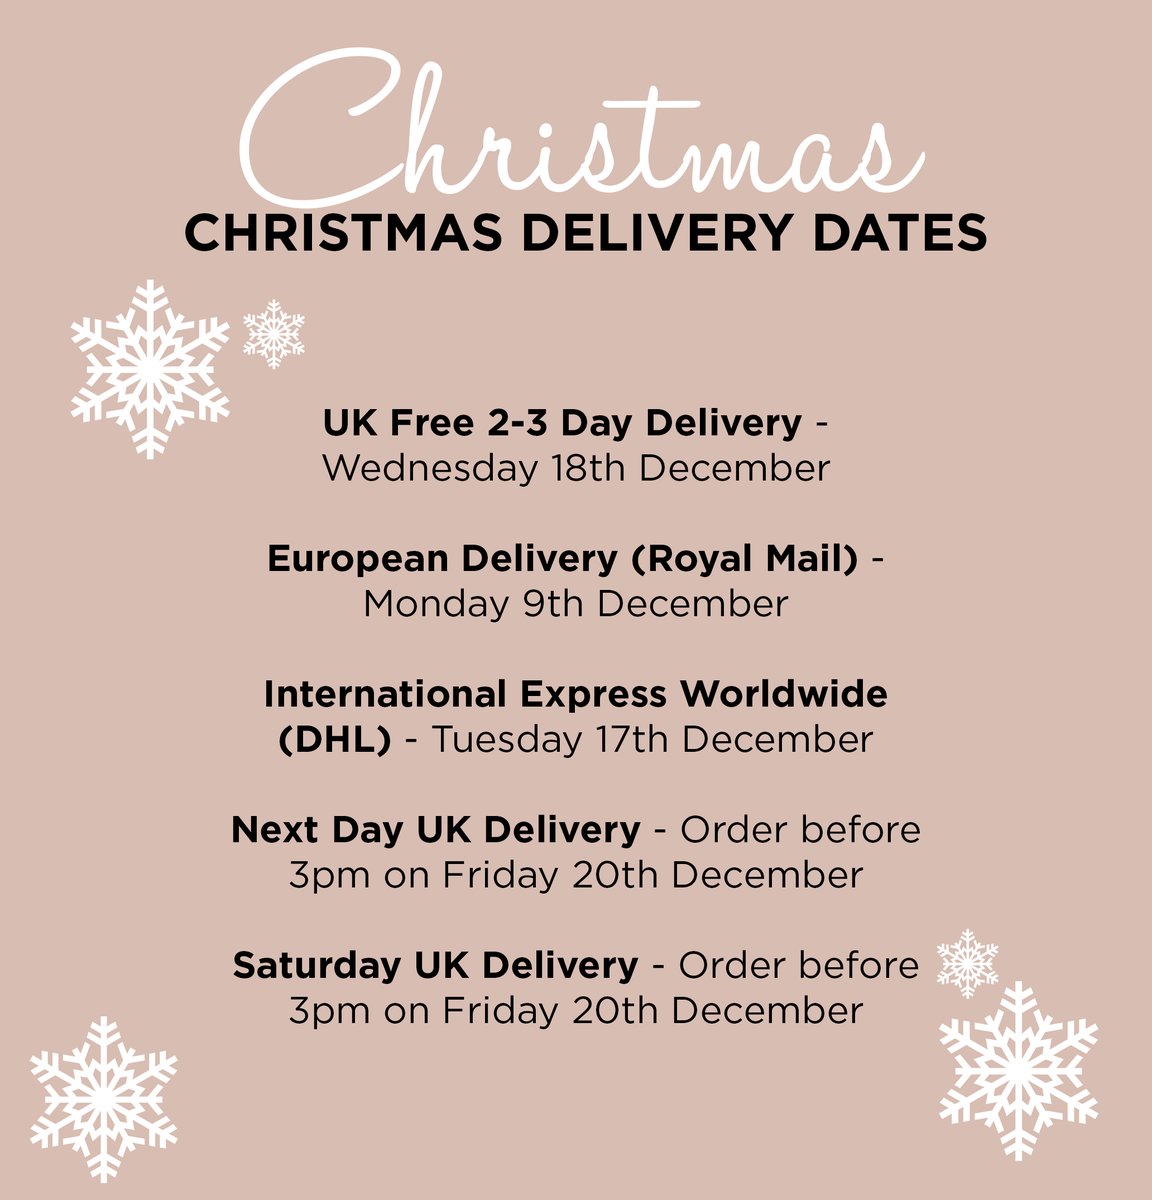 No pressure but Christmas is just around the corner so make a note of the last Christmas delivery dates so you are not left dissapointed and you get all the gifts you need 💫 #ChristmasDelivery #TakeNote #ShopStAlbans #onlineshopping